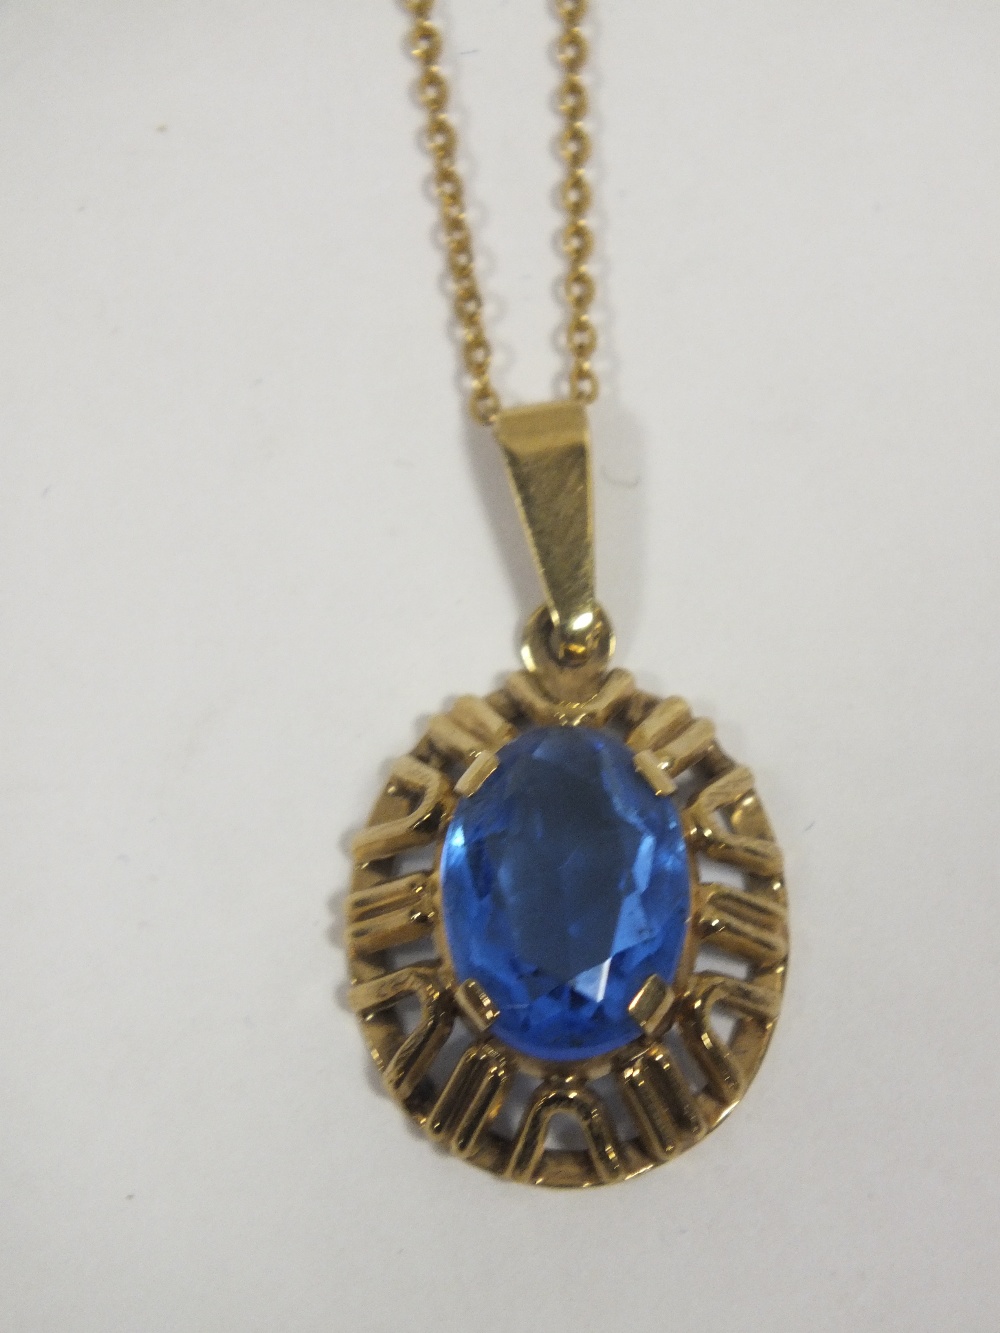 A 9CT GOLD PENDANT ON CHAIN SET WITH LARGE BLUE STONE